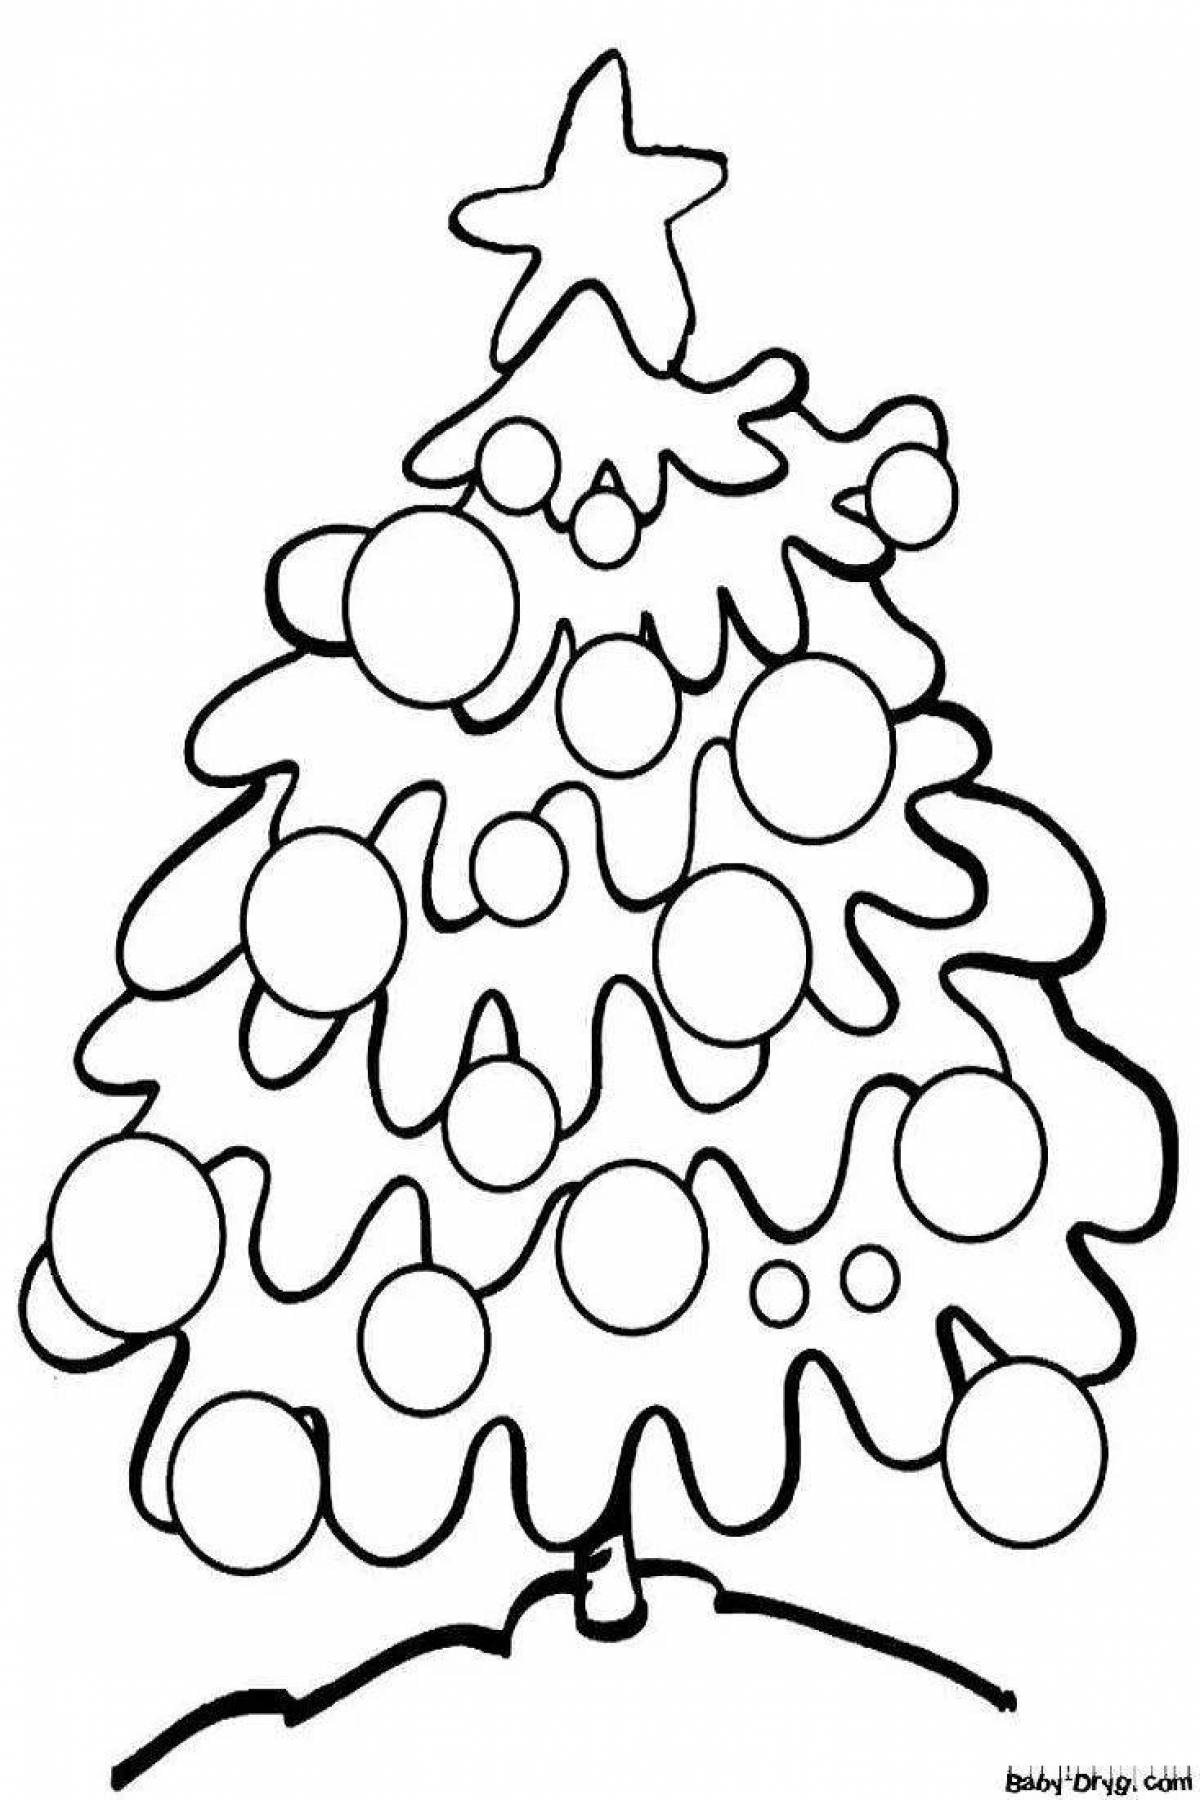 Large Christmas tree with balls for children